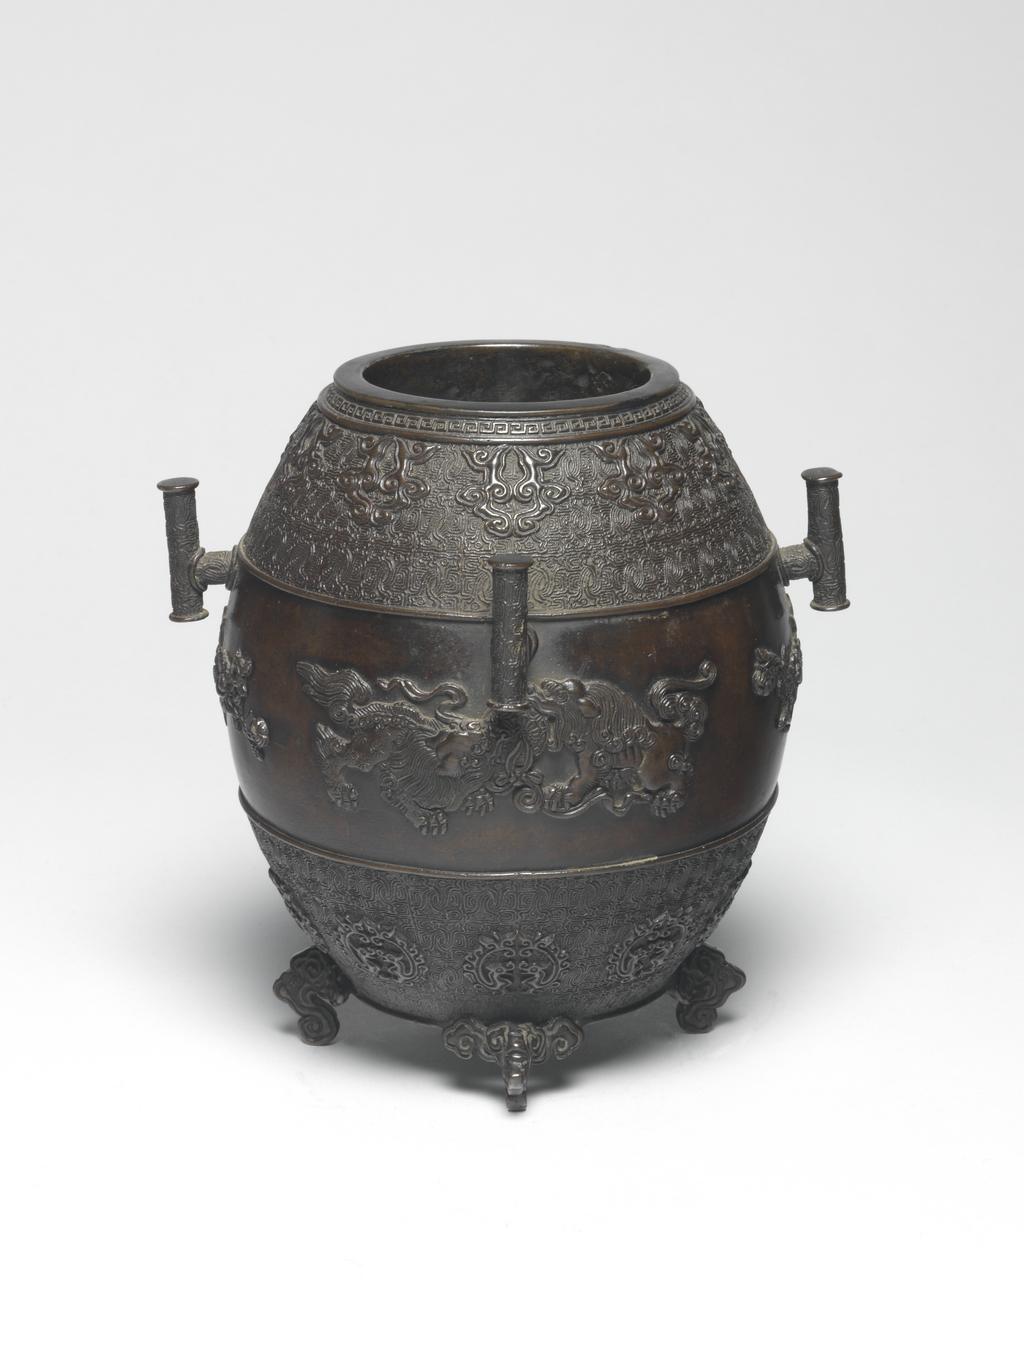 An image of Bronze censer. Seimin, Muraka (Japanese). Moulded, case decorated with two pairs of lions confronting each other on the surface. The censer is inscribed underneath with nine characters. Circa 1818-1829.